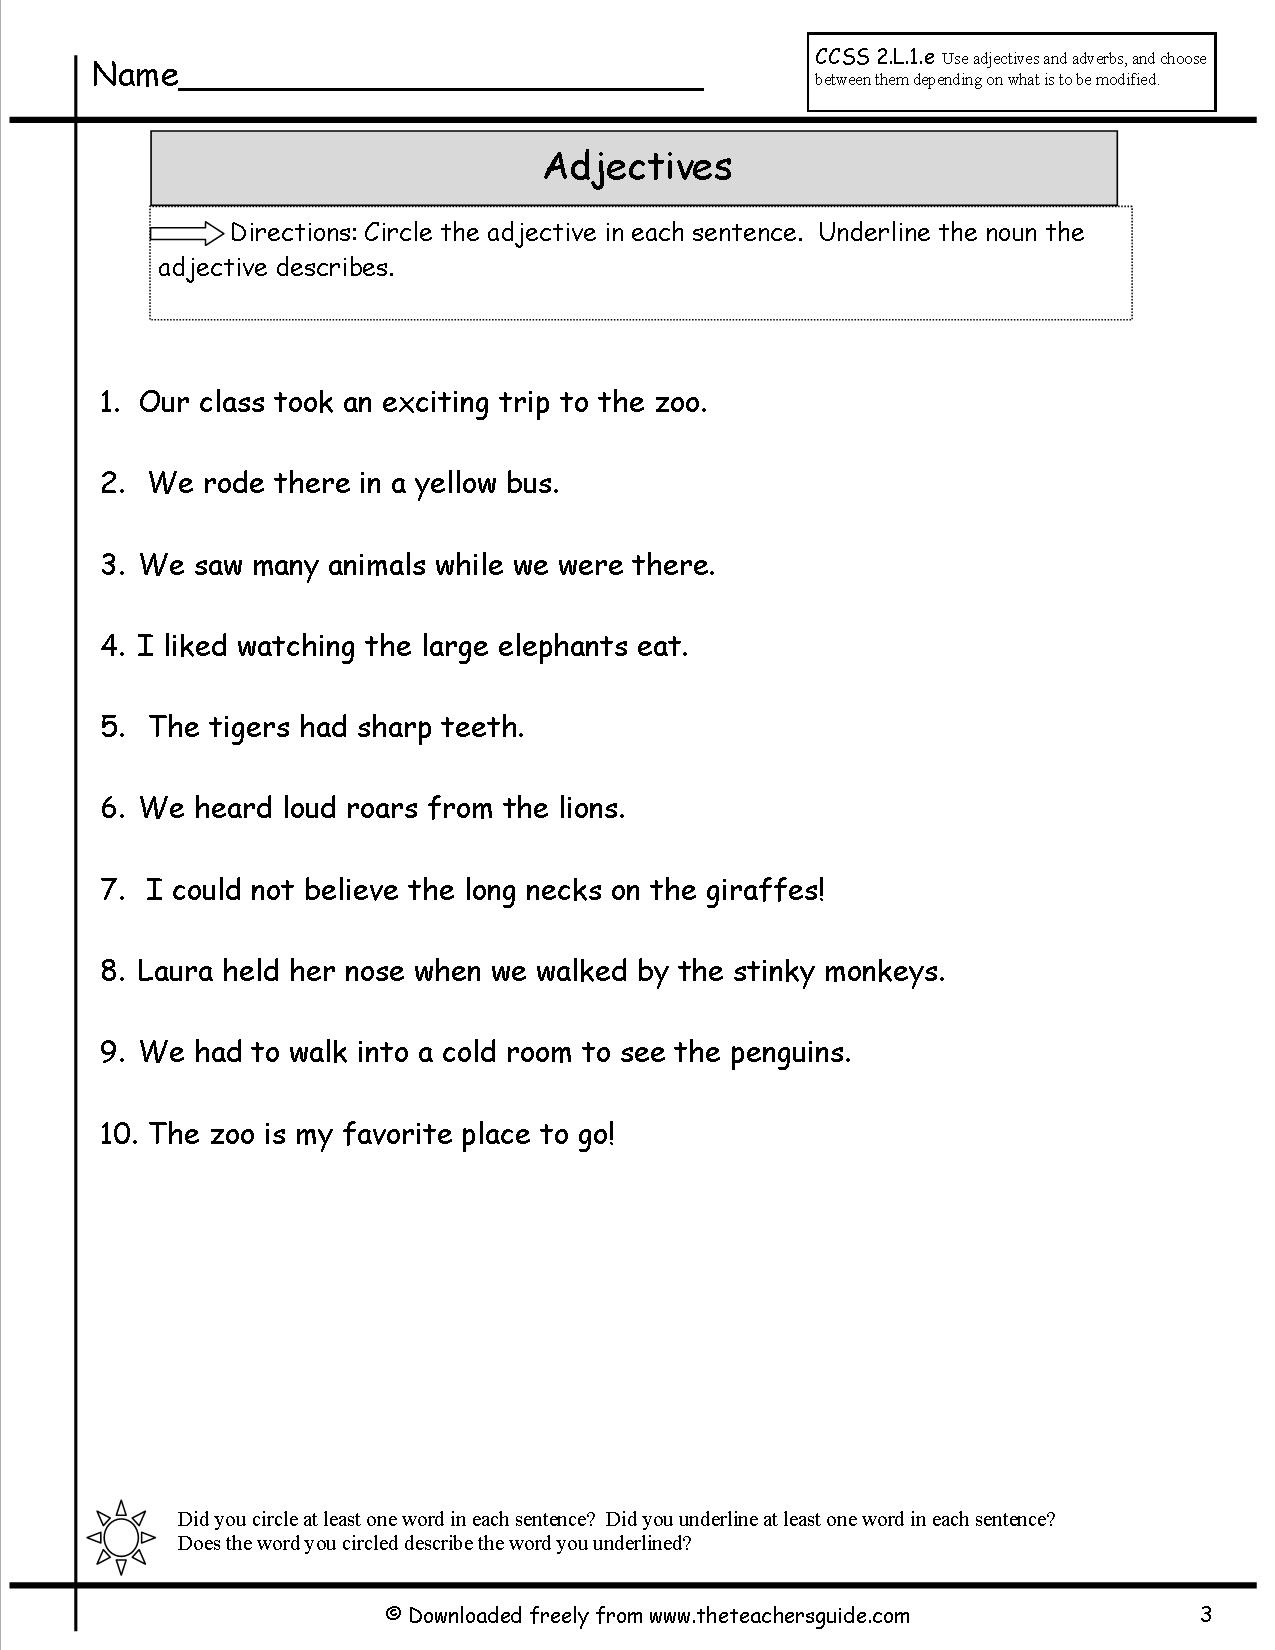 Adjective Worksheets 5th Grade